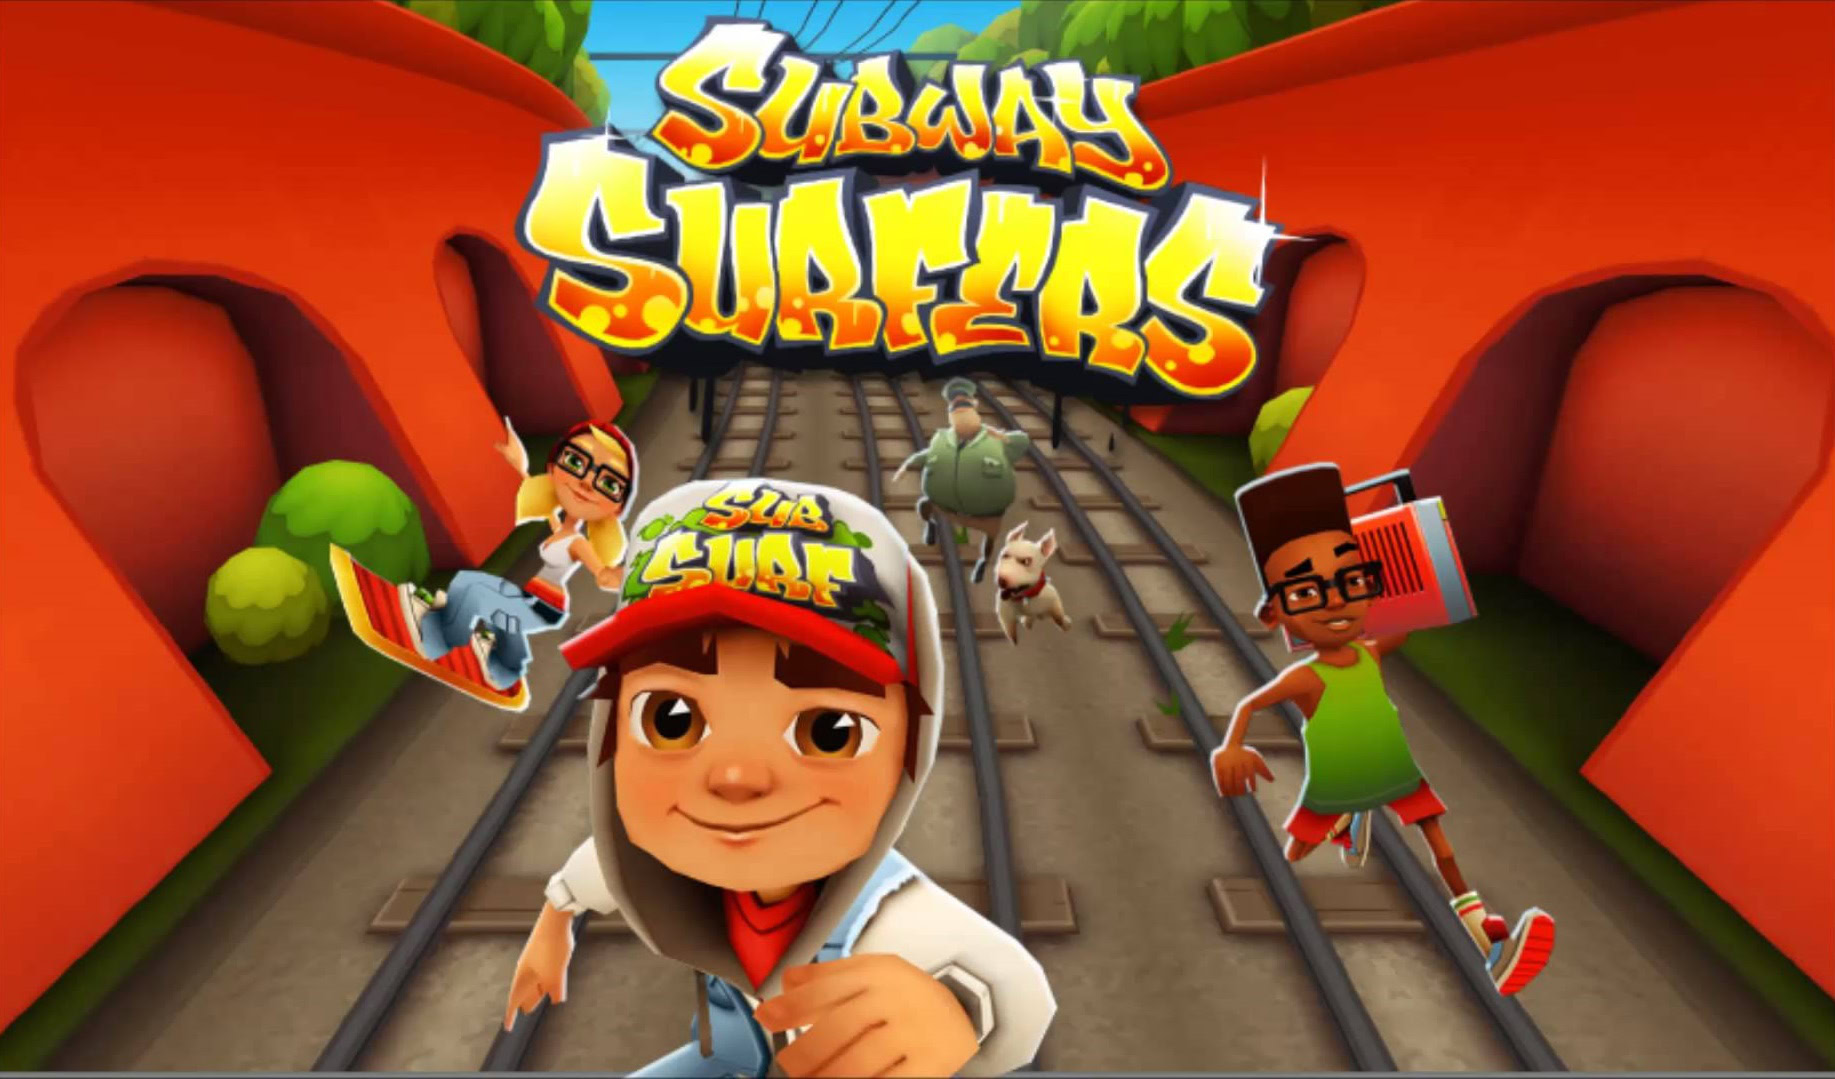 Subway Surfers endless runner gets updated with new content